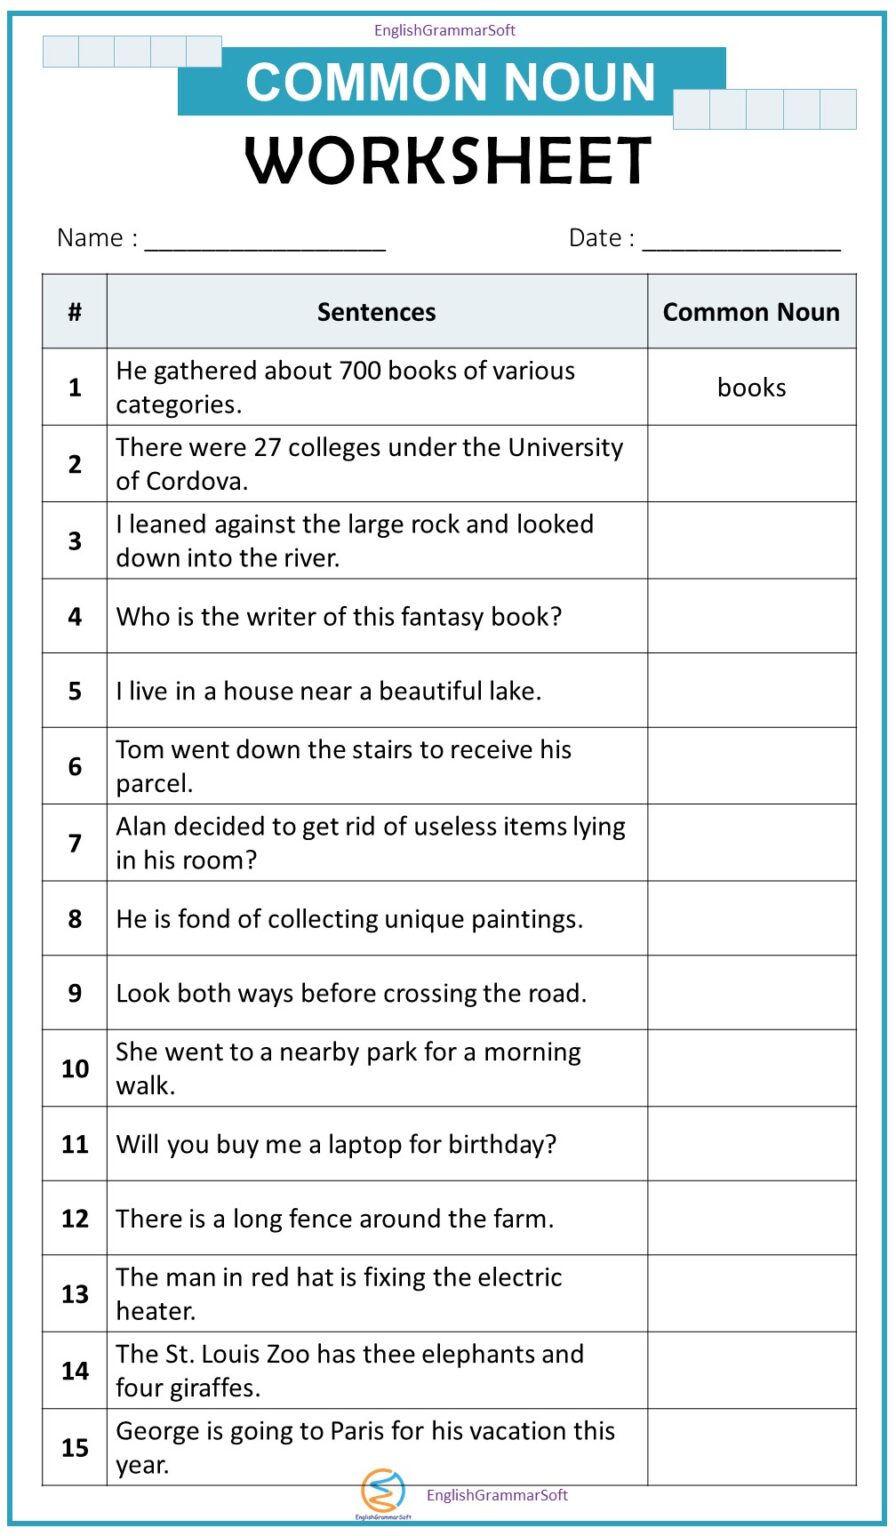 count-and-noncount-nouns-english-esl-worksheets-for-distance-learning-and-physical-classrooms